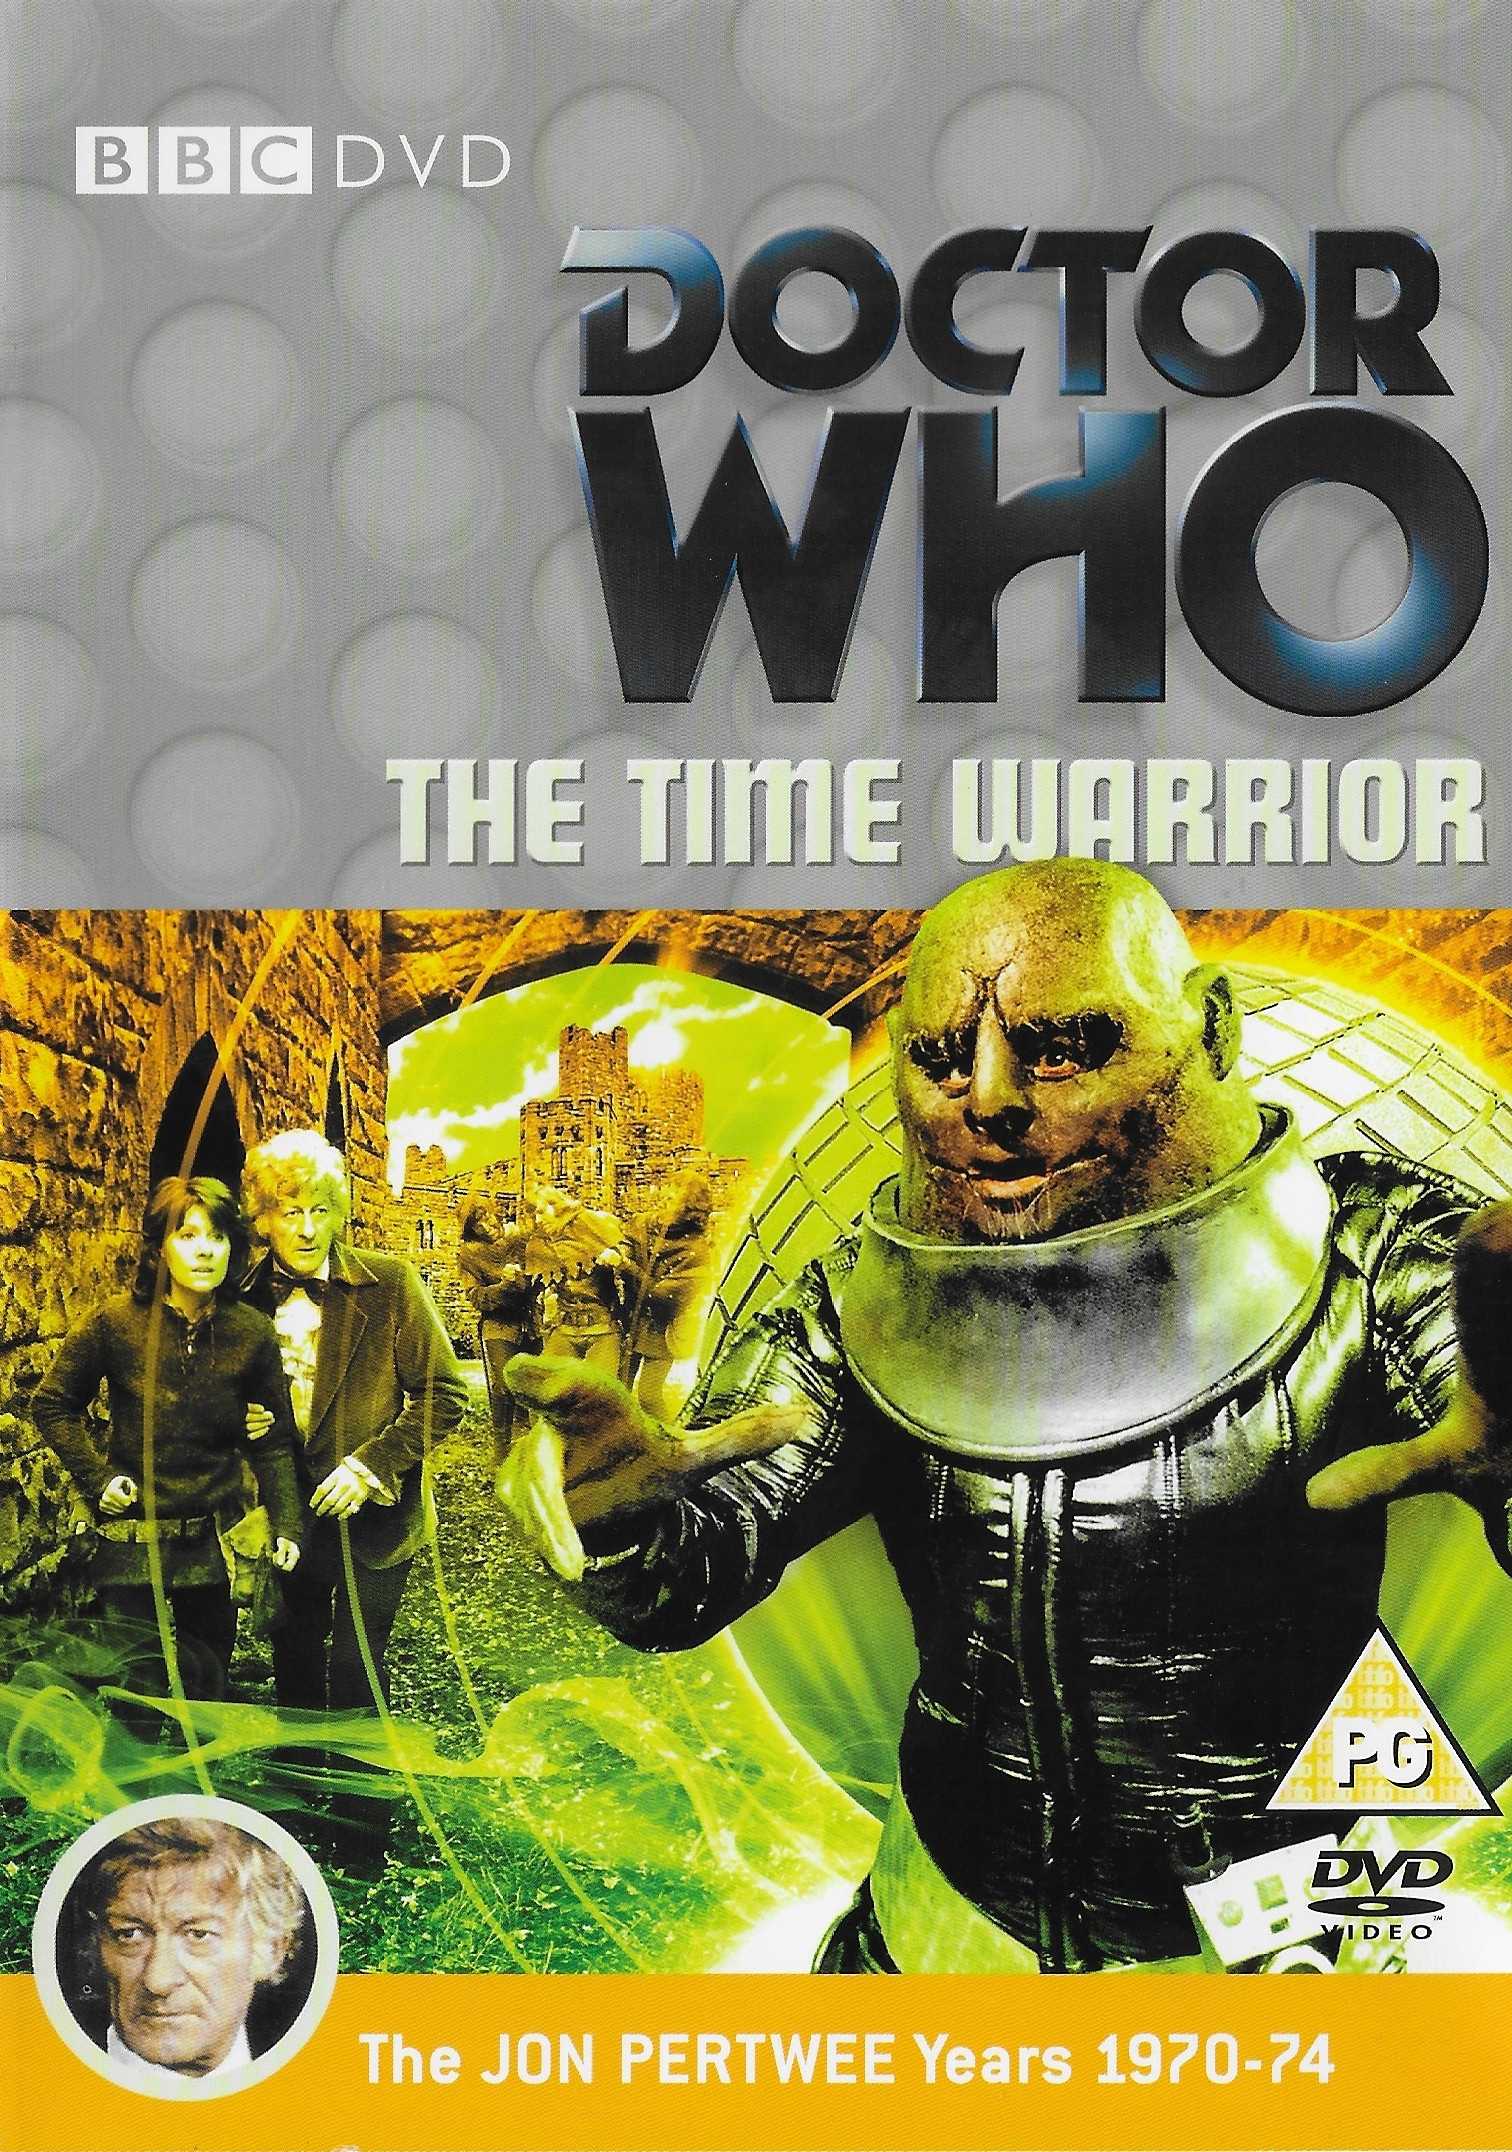 Picture of BBCDVD 2334 Doctor Who - The time warrior by artist Robert Holmes from the BBC dvds - Records and Tapes library